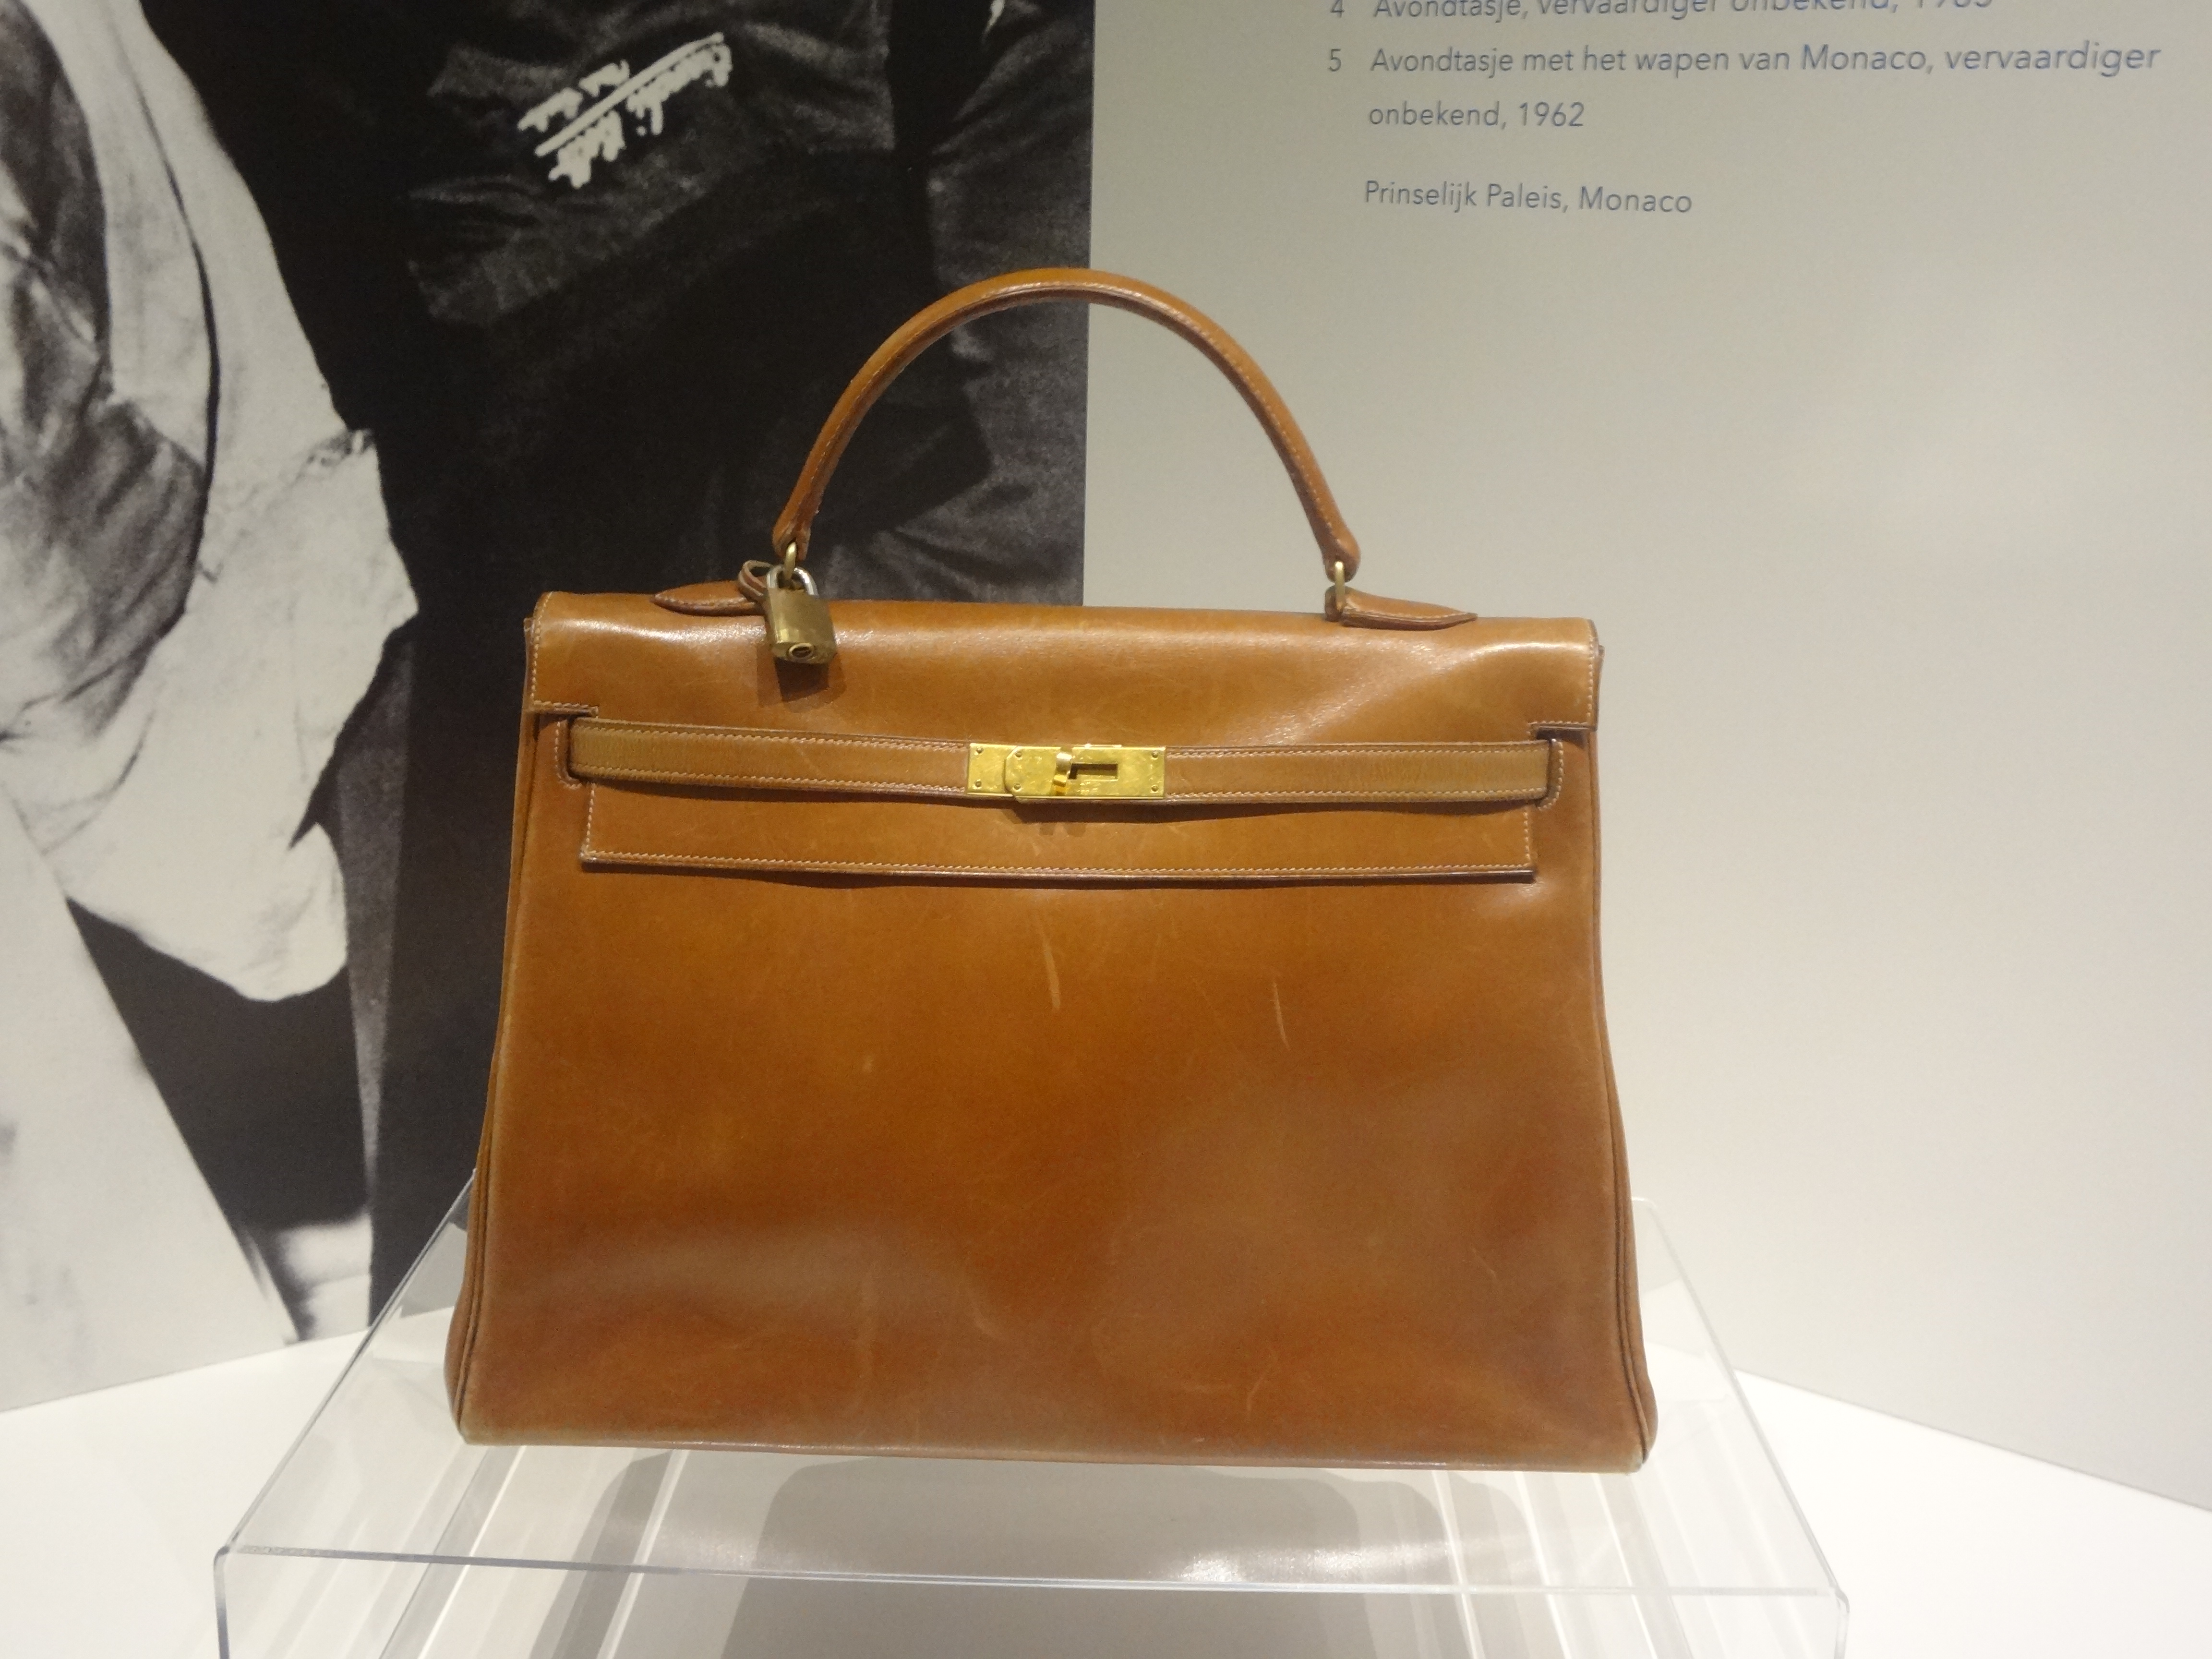 history of the hermes kelly bag and grace kelly